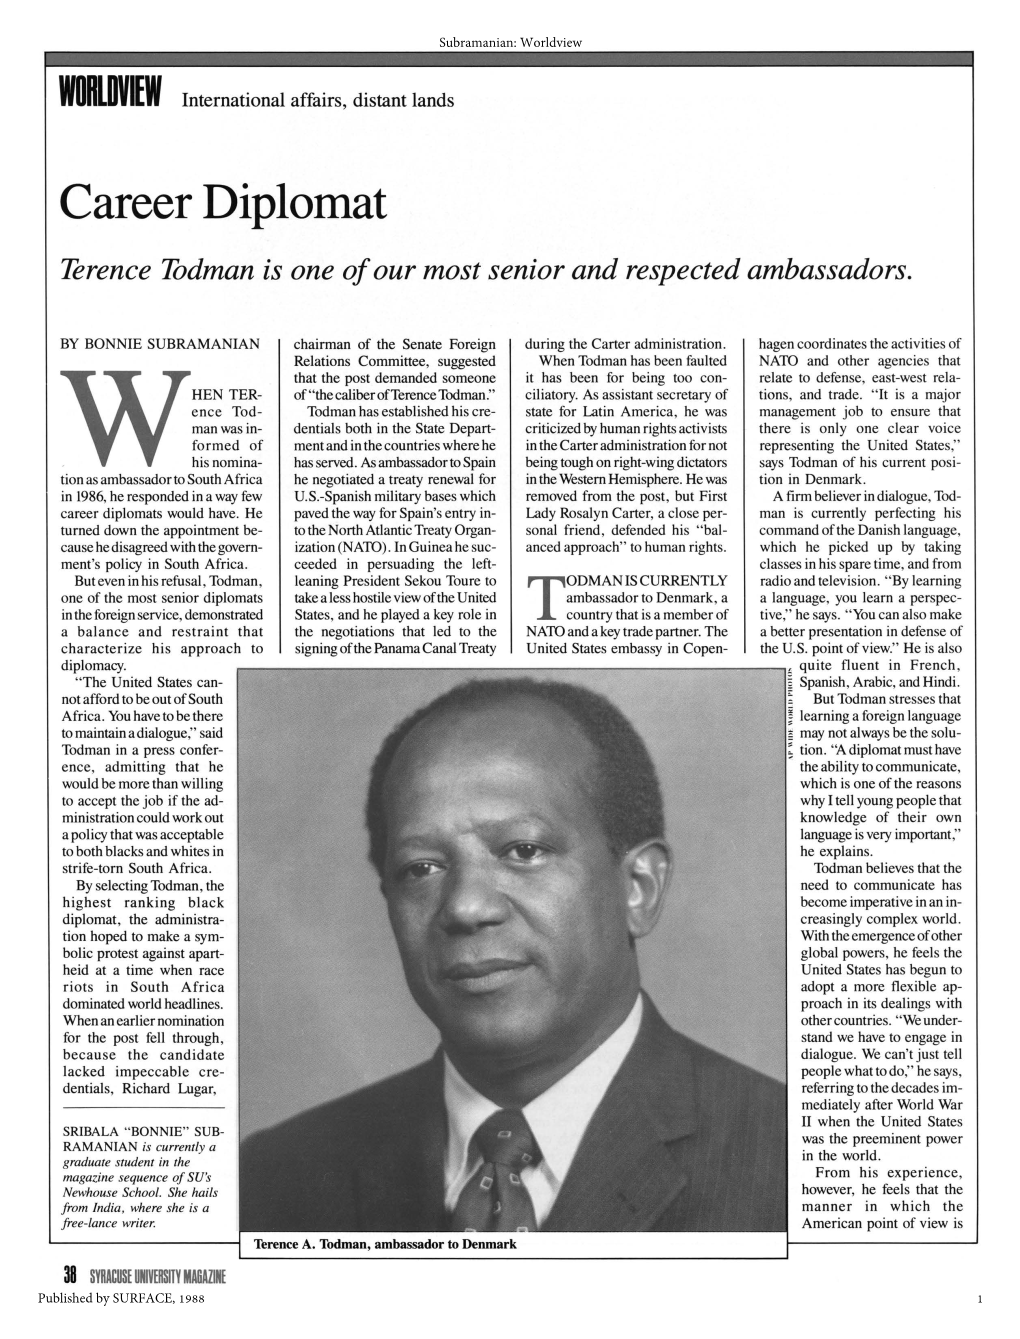 Career Diplomat Terence Todman Is One of Our Most Senior and Respected Ambassadors